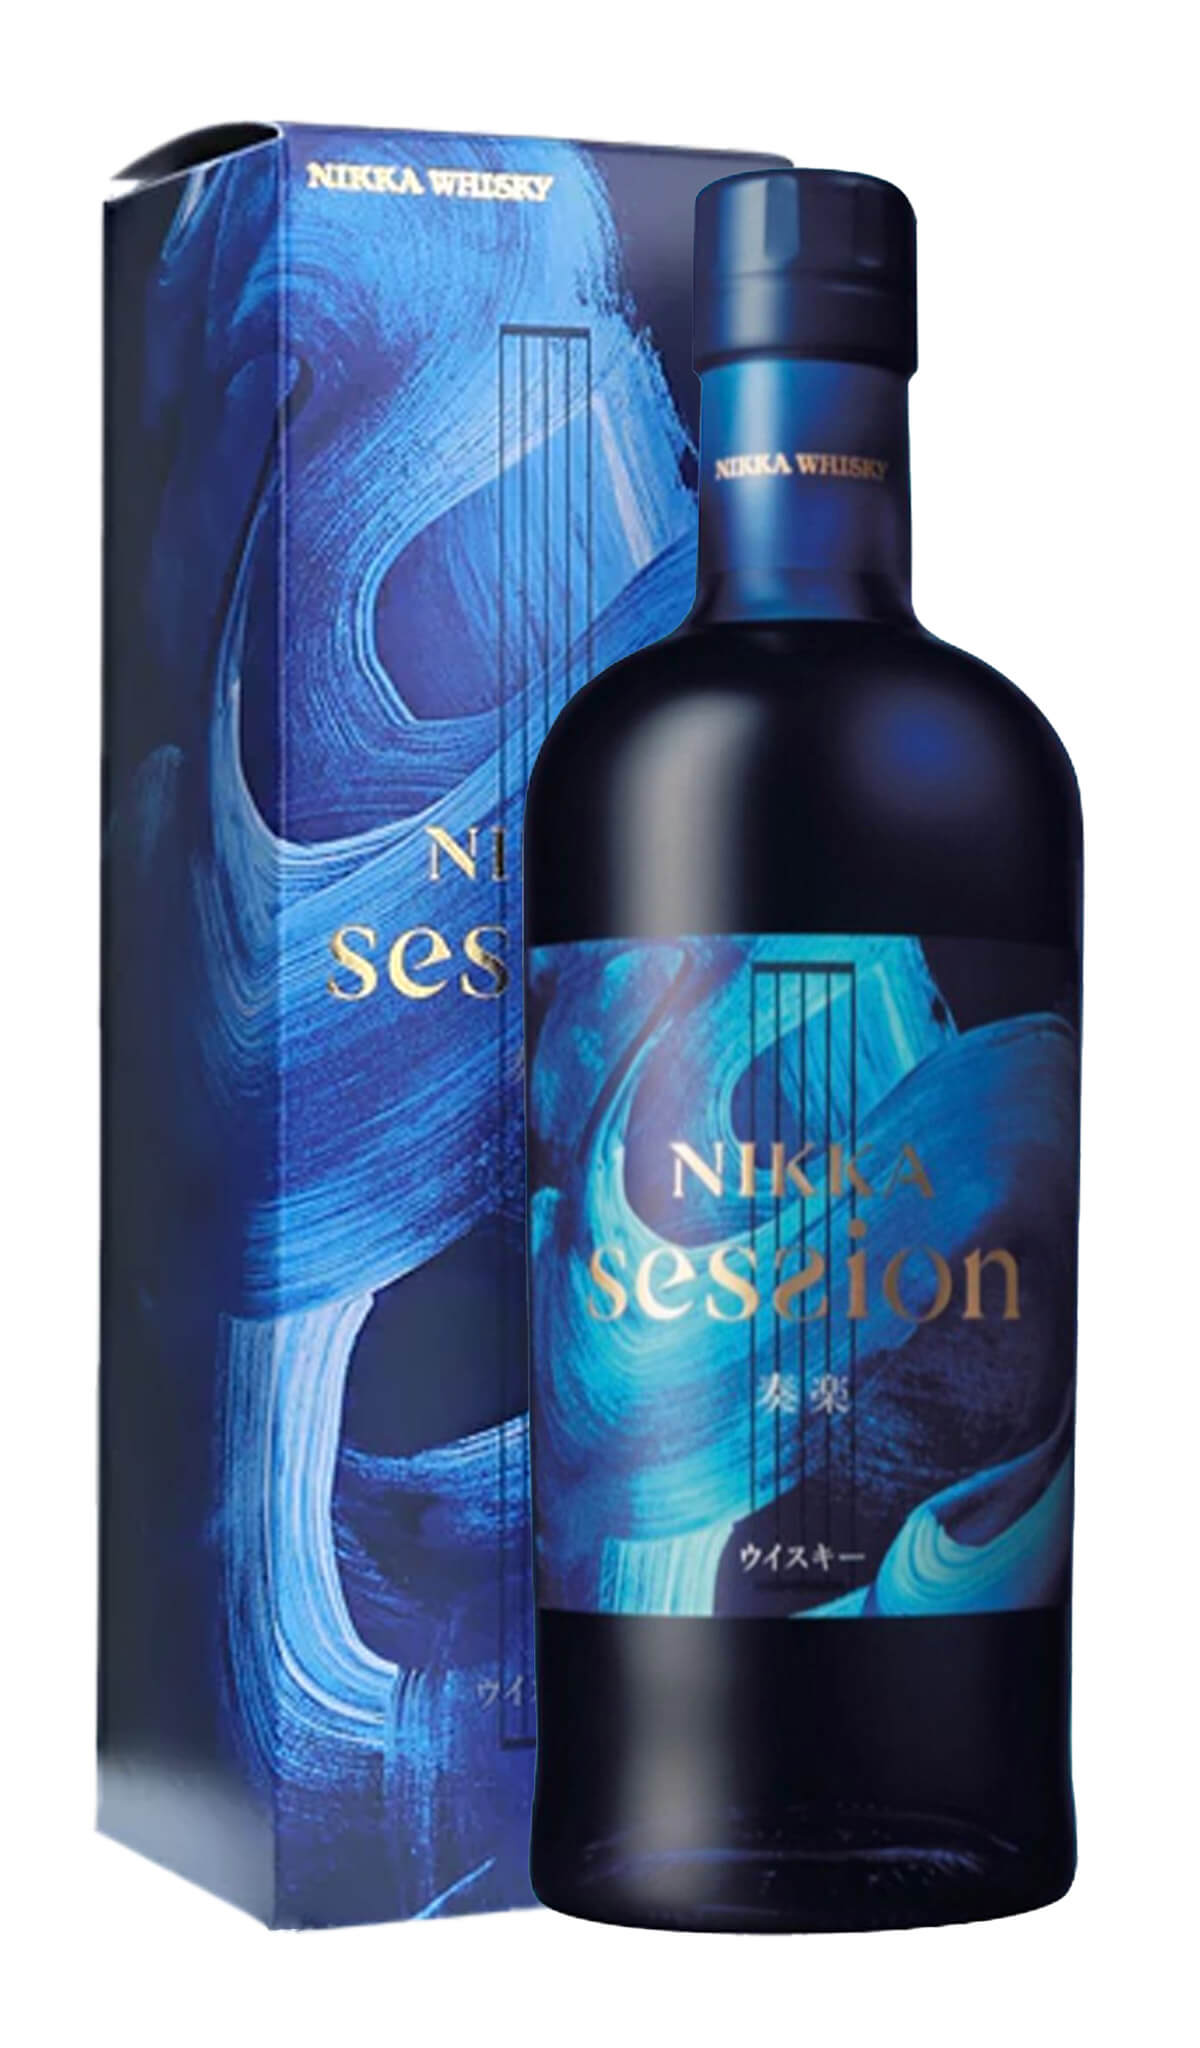 Find out more, explore the range or buy Nikka Session Whisky 700mL available online at Wine Sellers Direct - Australia's independent liquor specialists.